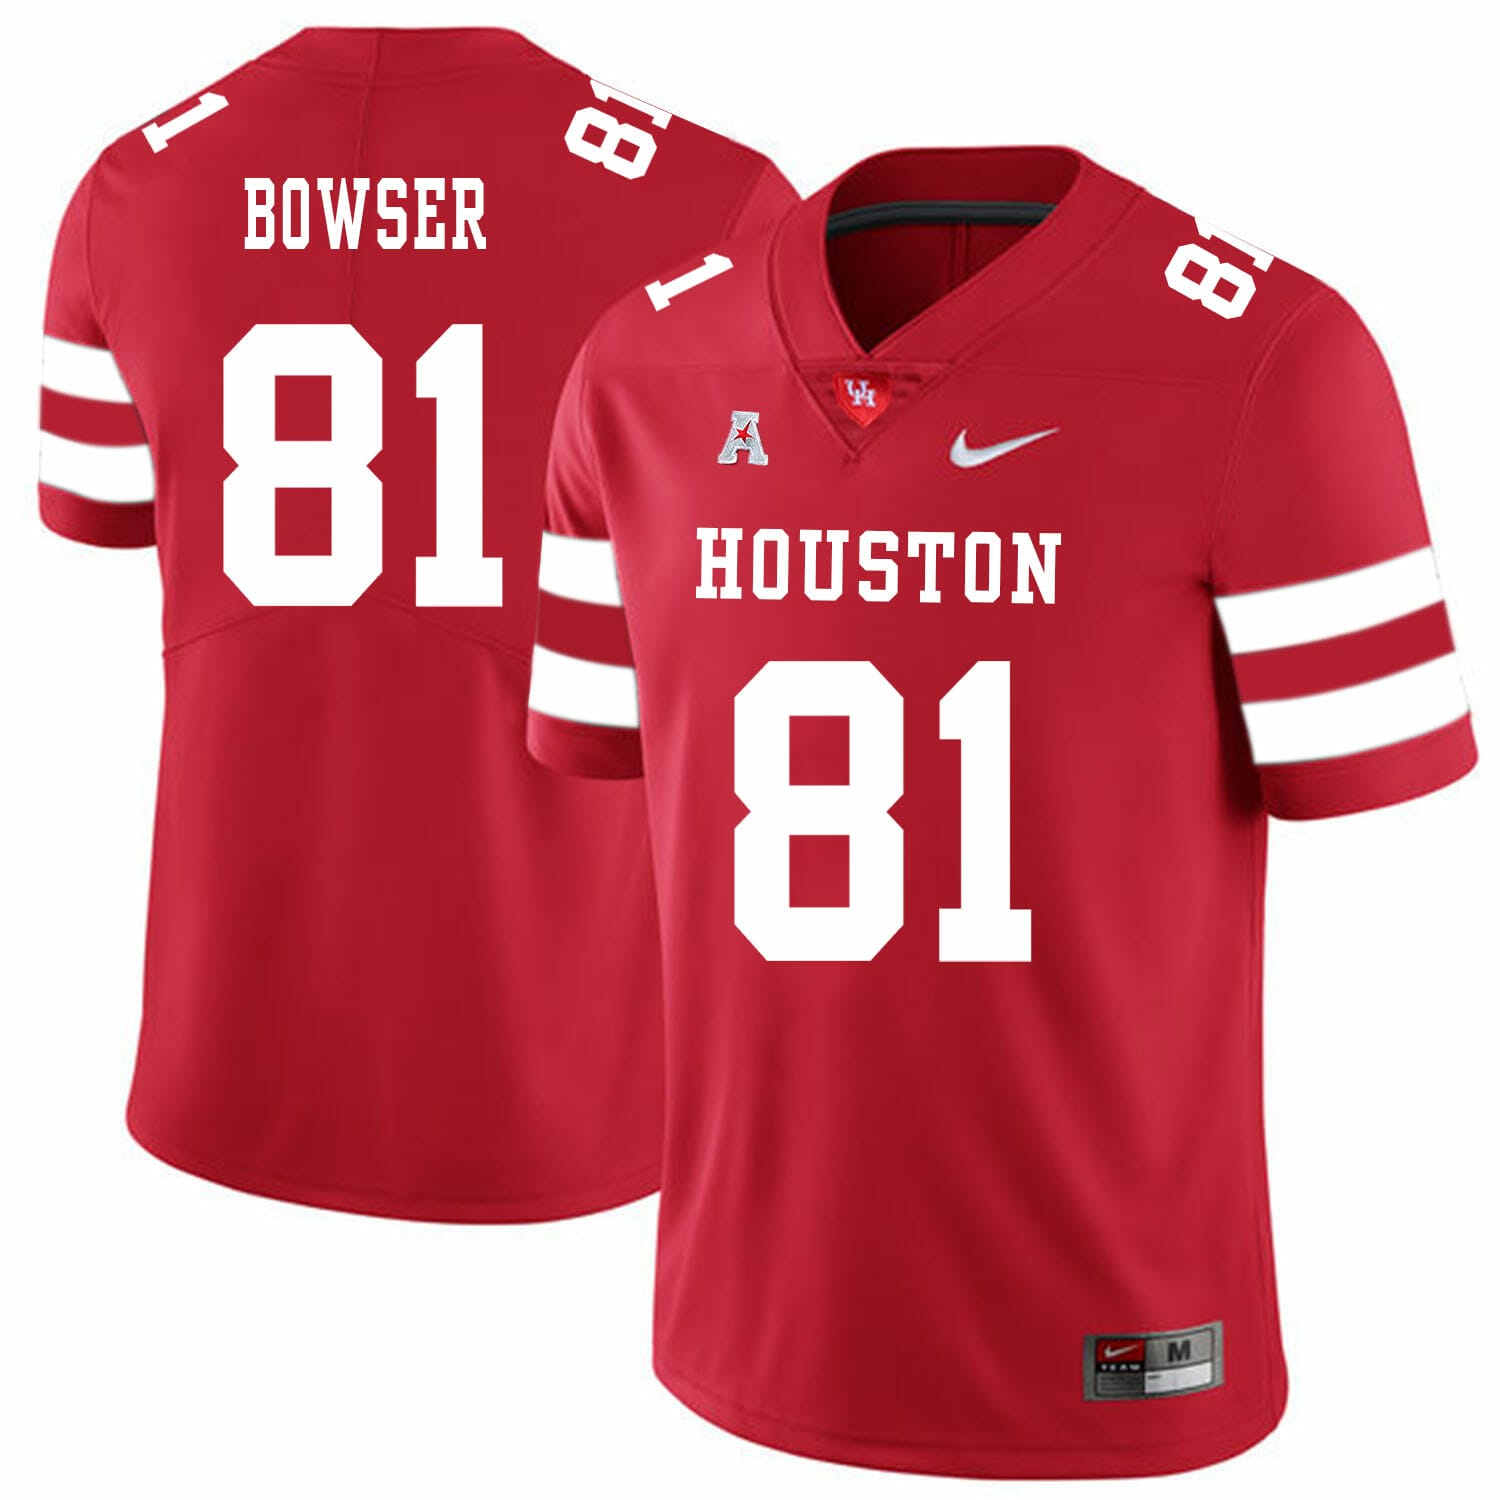 Houston Cougars #81 Tyus Bowser College Football Jersey Red - Malcom Terry